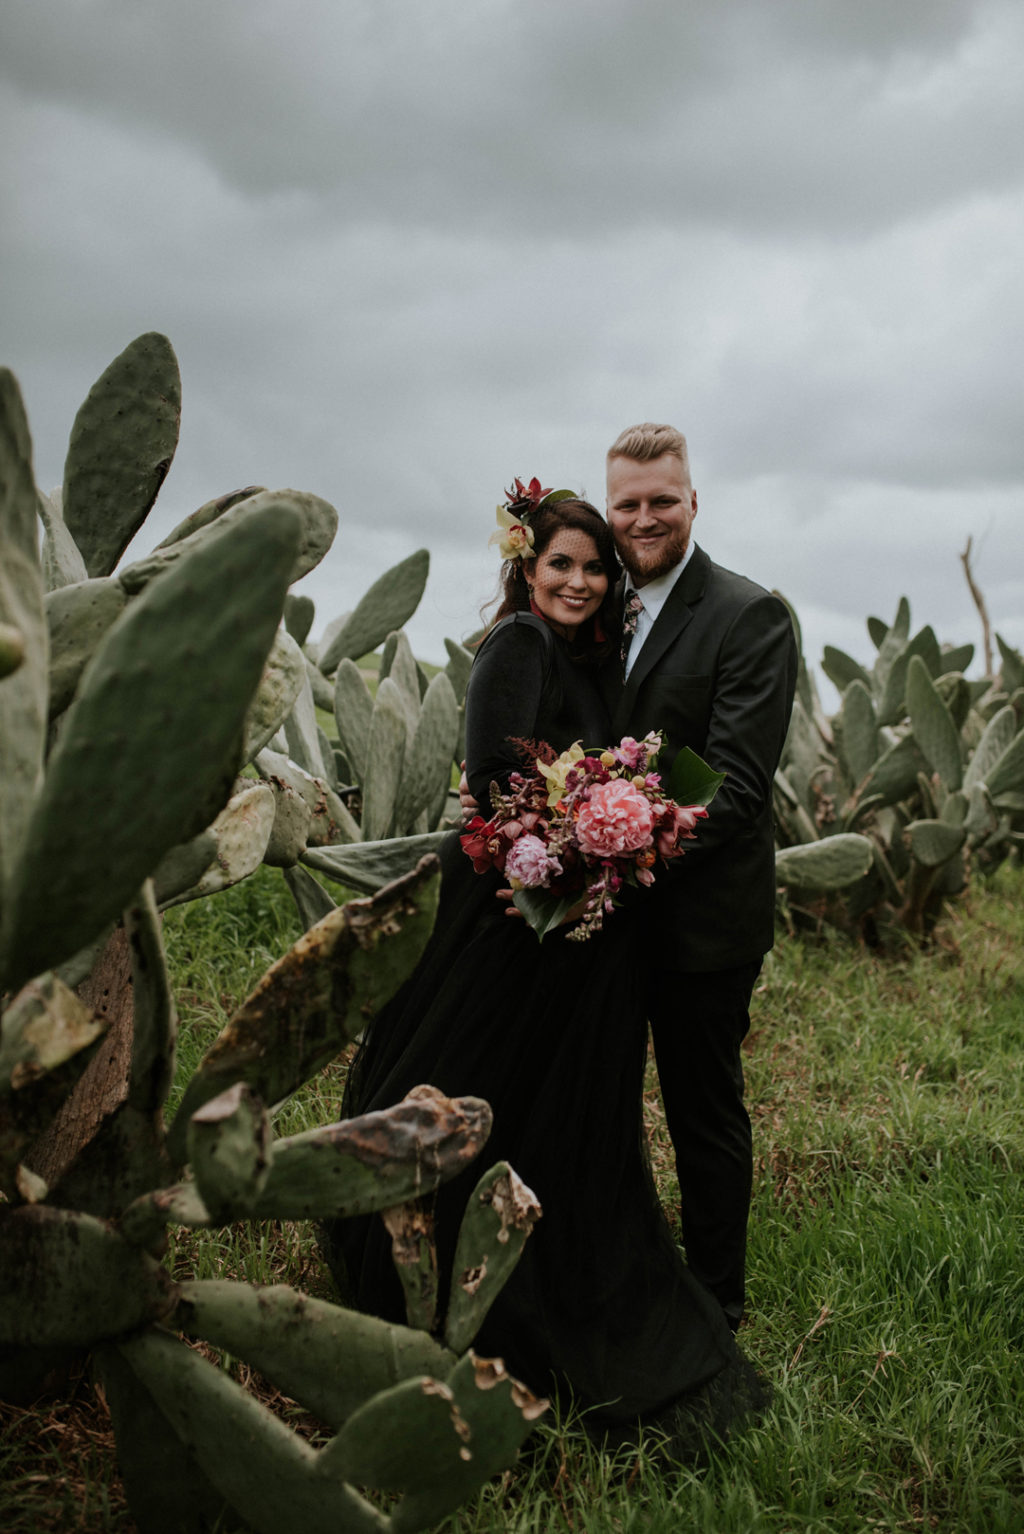 This moody wedding took place in Cape Town and was moody, yet done with bright orchids and other bright blooms